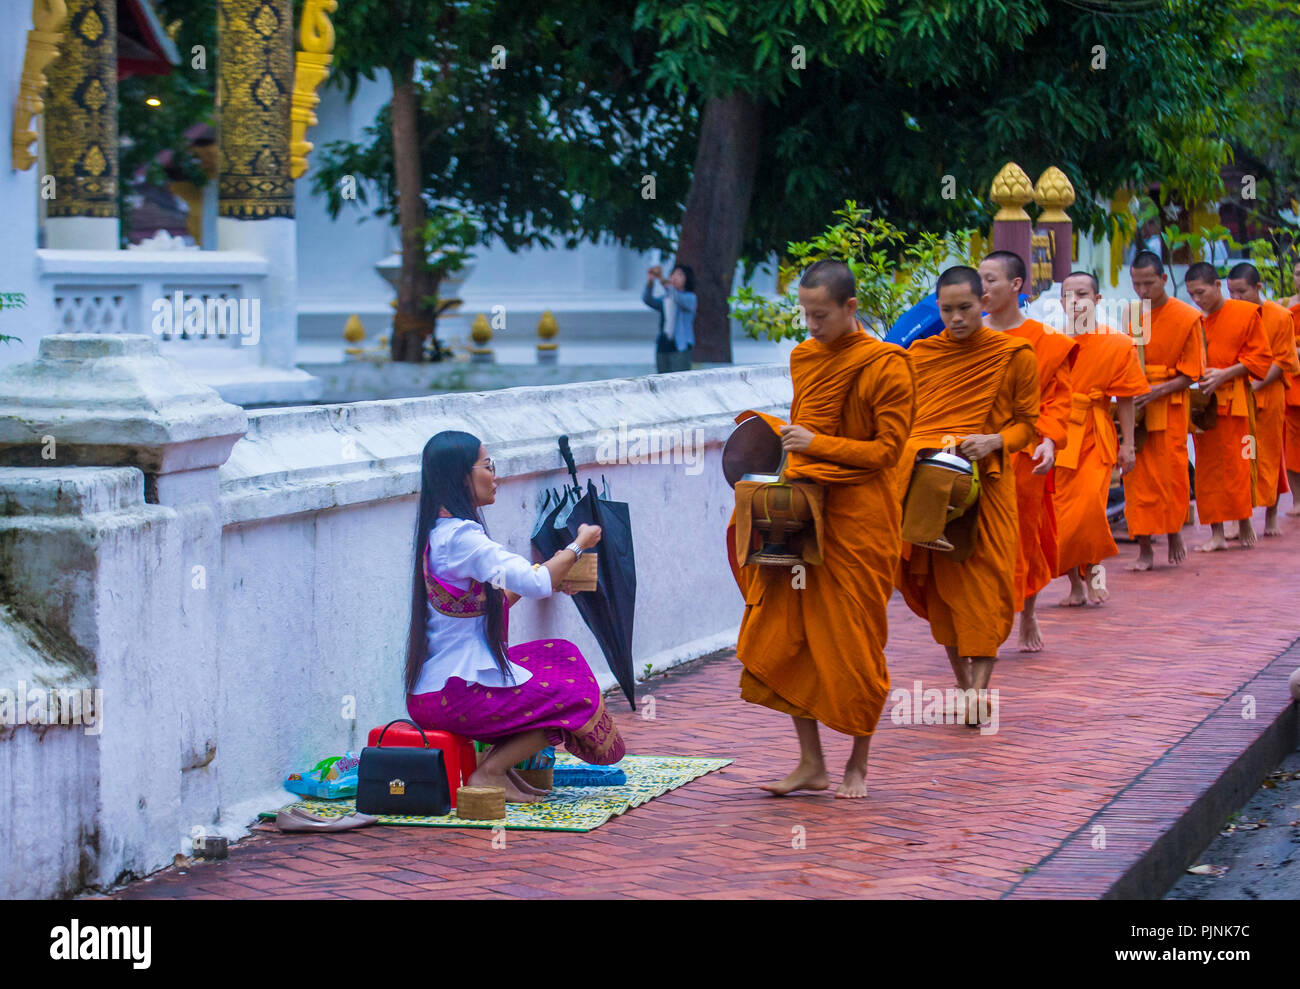 Buddhist alms giving ceremony in Luang Prabang Laos Stock Photo